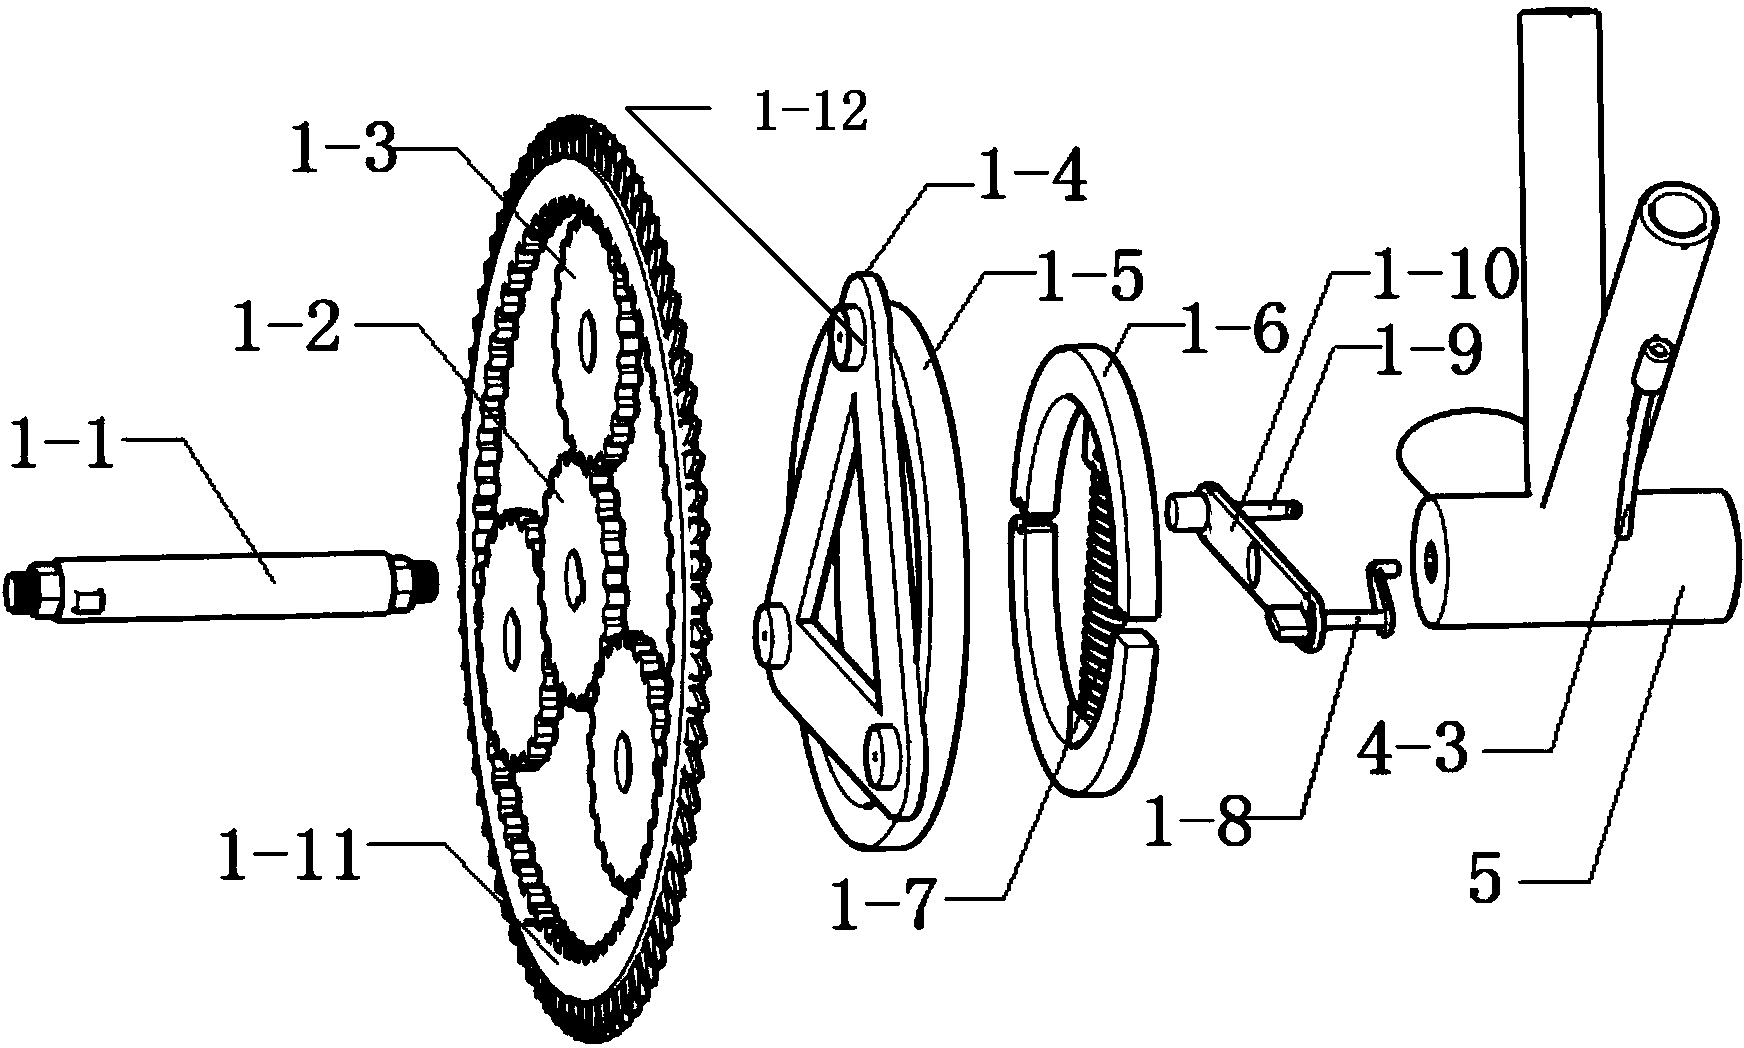 Novel linear speed change device for bicycle